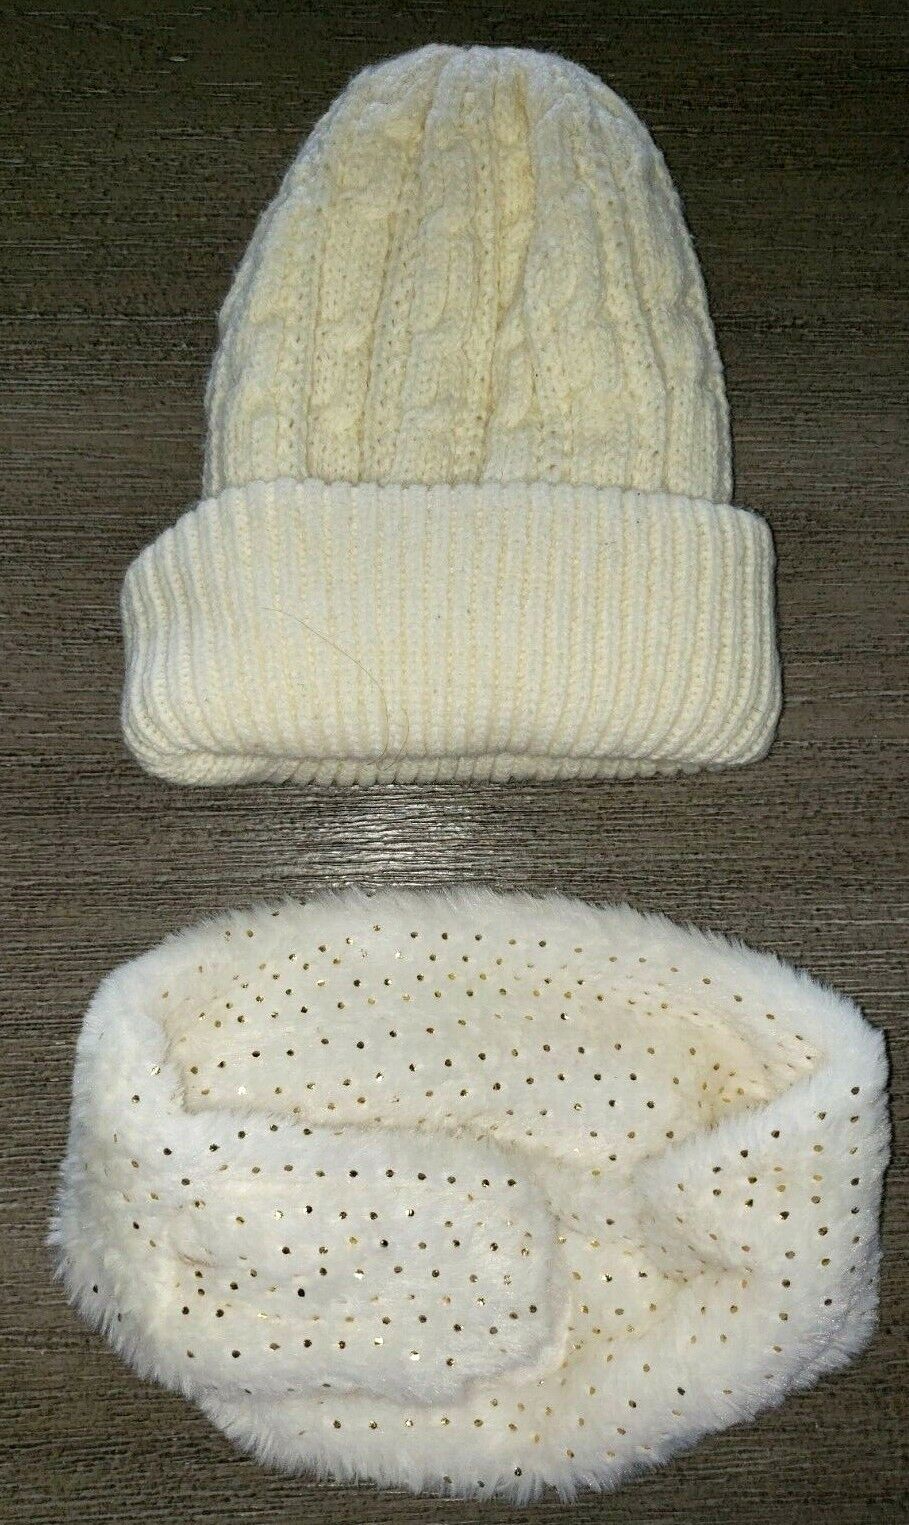 hanes her way DOUBLE LAYER KNIT BEANIE HAT FLEECE HEADBAND gold dots sparkles 